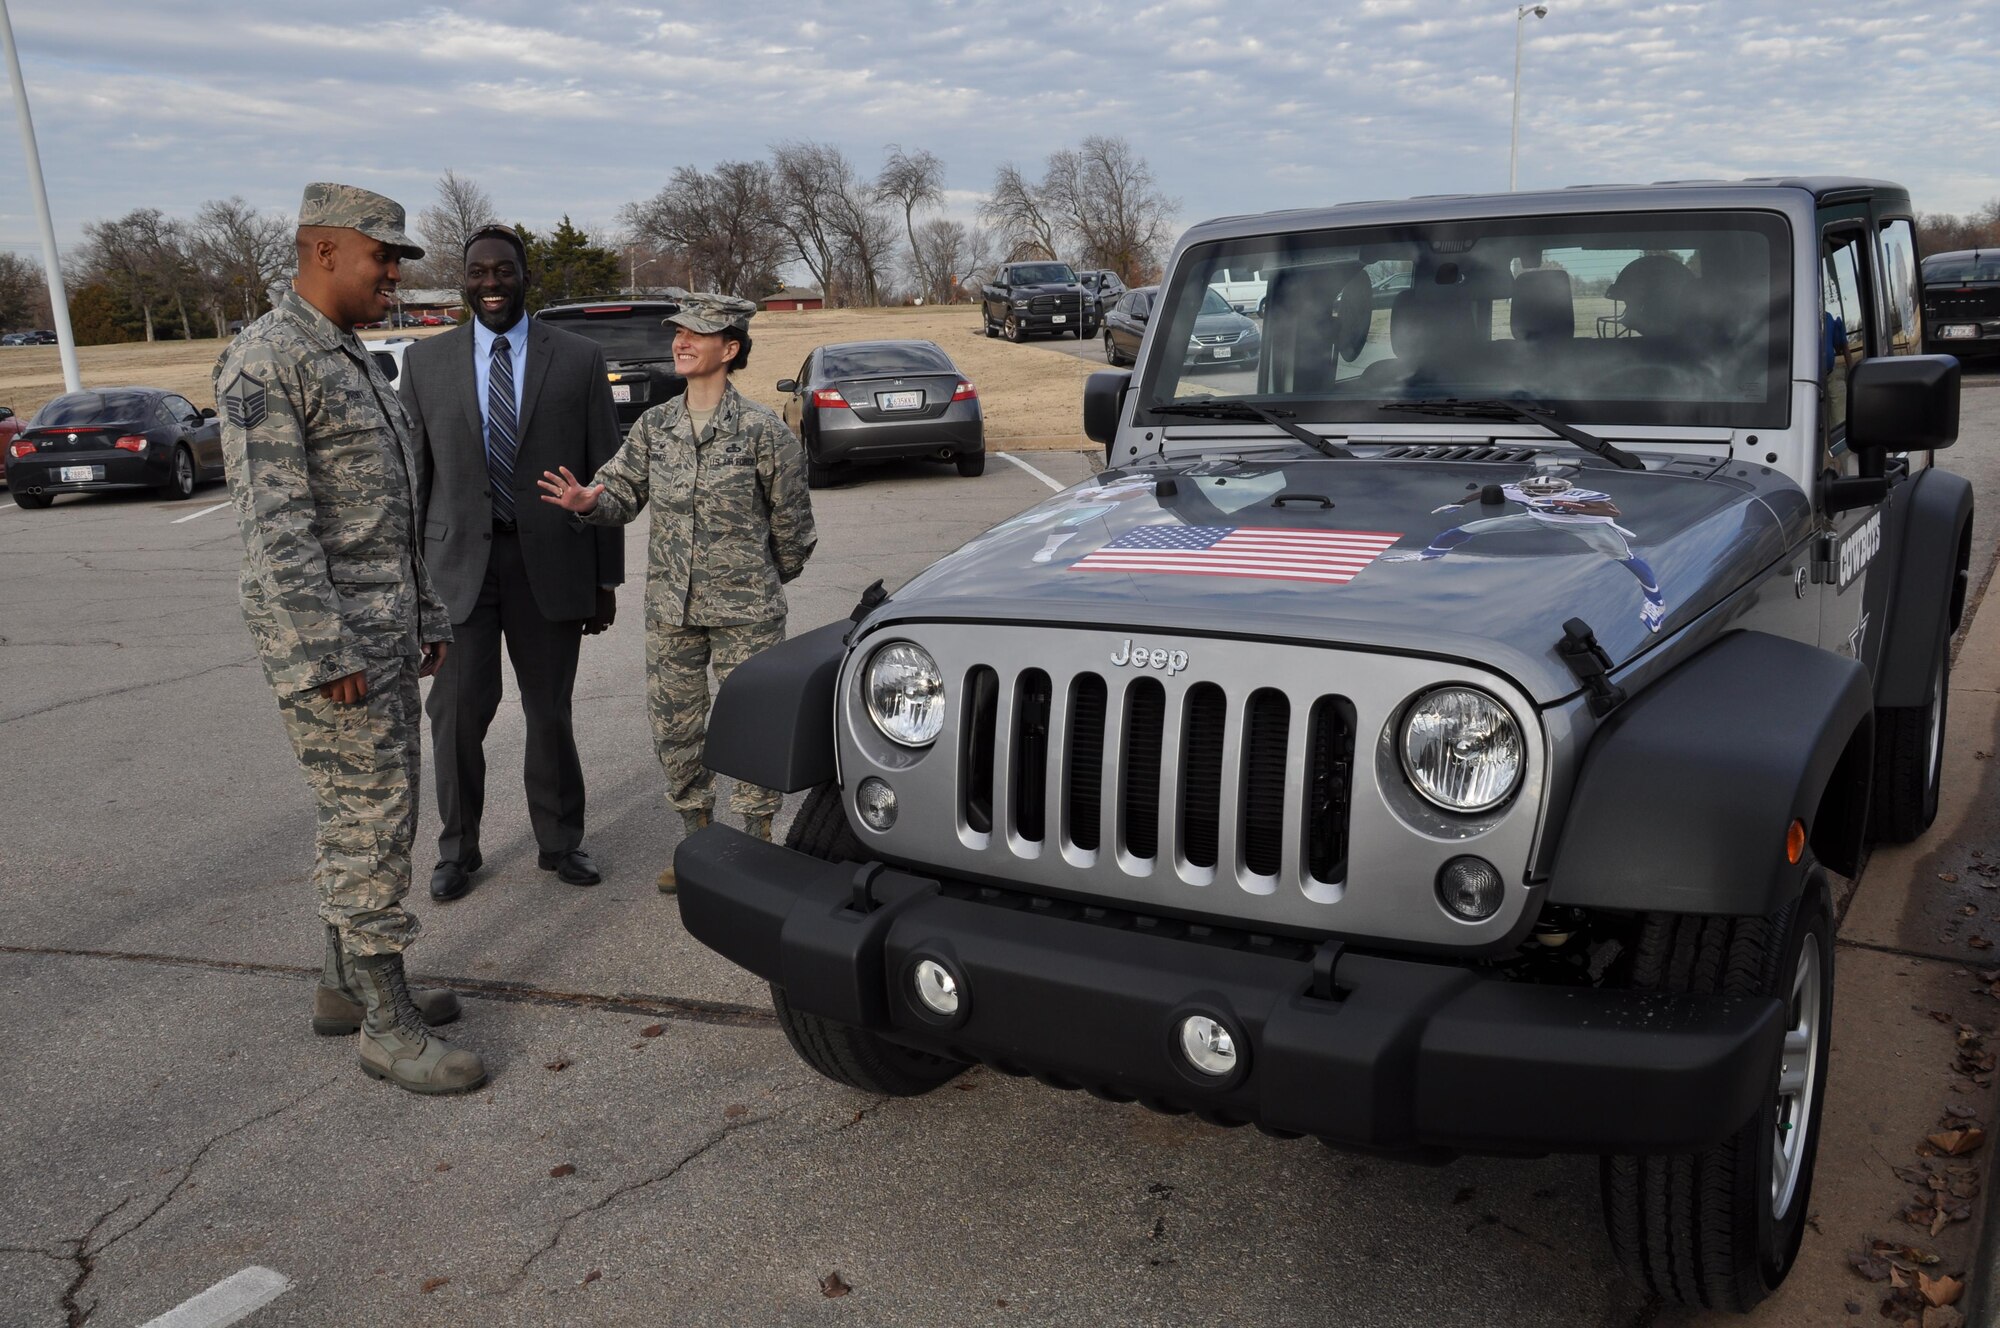 Master Sgt. Steven Pruitt, left, admires his new 2017 Jeep Wrangler, the grand prize in the Air Force Services Activity's Air Force Club Membership Giveaway, at Tinker Air Force Base, Oklahoma, Dec. 21, 2016. Col. Donna L. Turner, right, AFSVA commander, presented the keys at Pruitt’s squadron commander’s call. Pruitt, the NCO in charge of the Cyber Security Office, 552nd Air Control Network Squadron, entered the giveaway 20 times; his name was randomly generated from more than 11,000 entries. Standing with them is Jon Boyd, AFSVA club operations branch chief. 